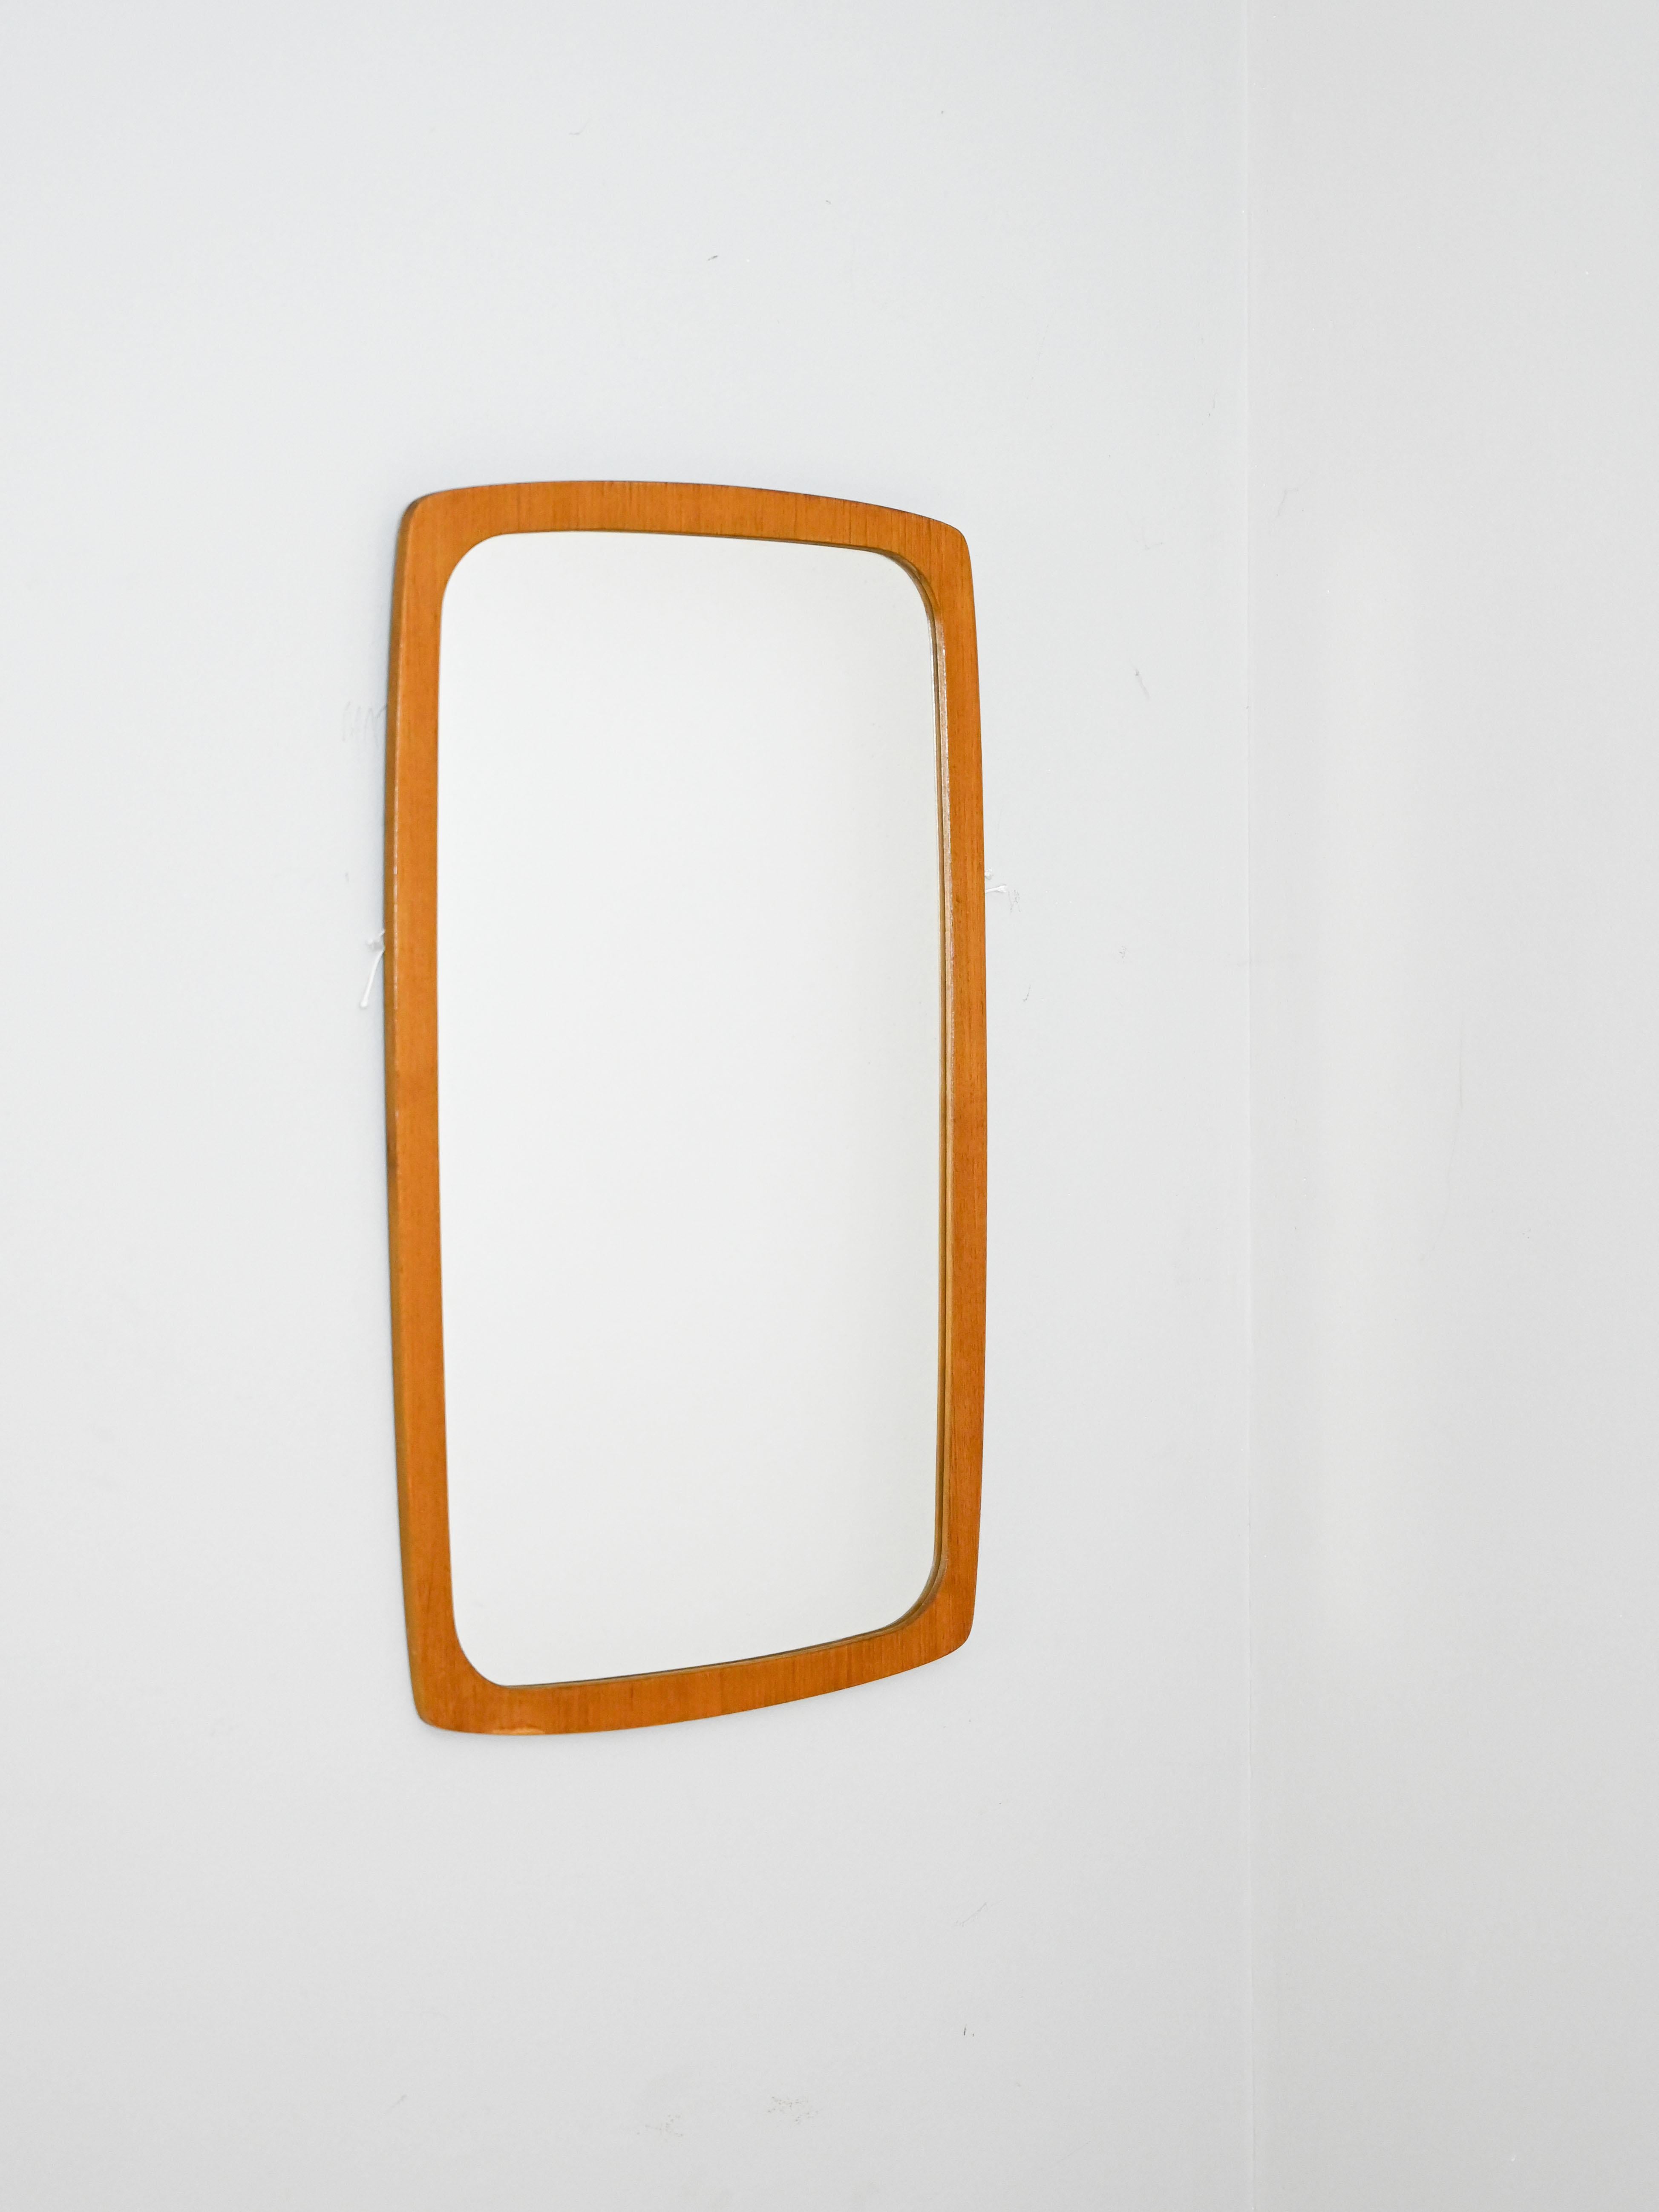 Swedish vintage mirror.

This mirror with a simple and modern shape is distinguished by the frame with rounded corners. 
A versatile piece of furniture suitable for different types of environments, it will give a retro look to the room.

Good